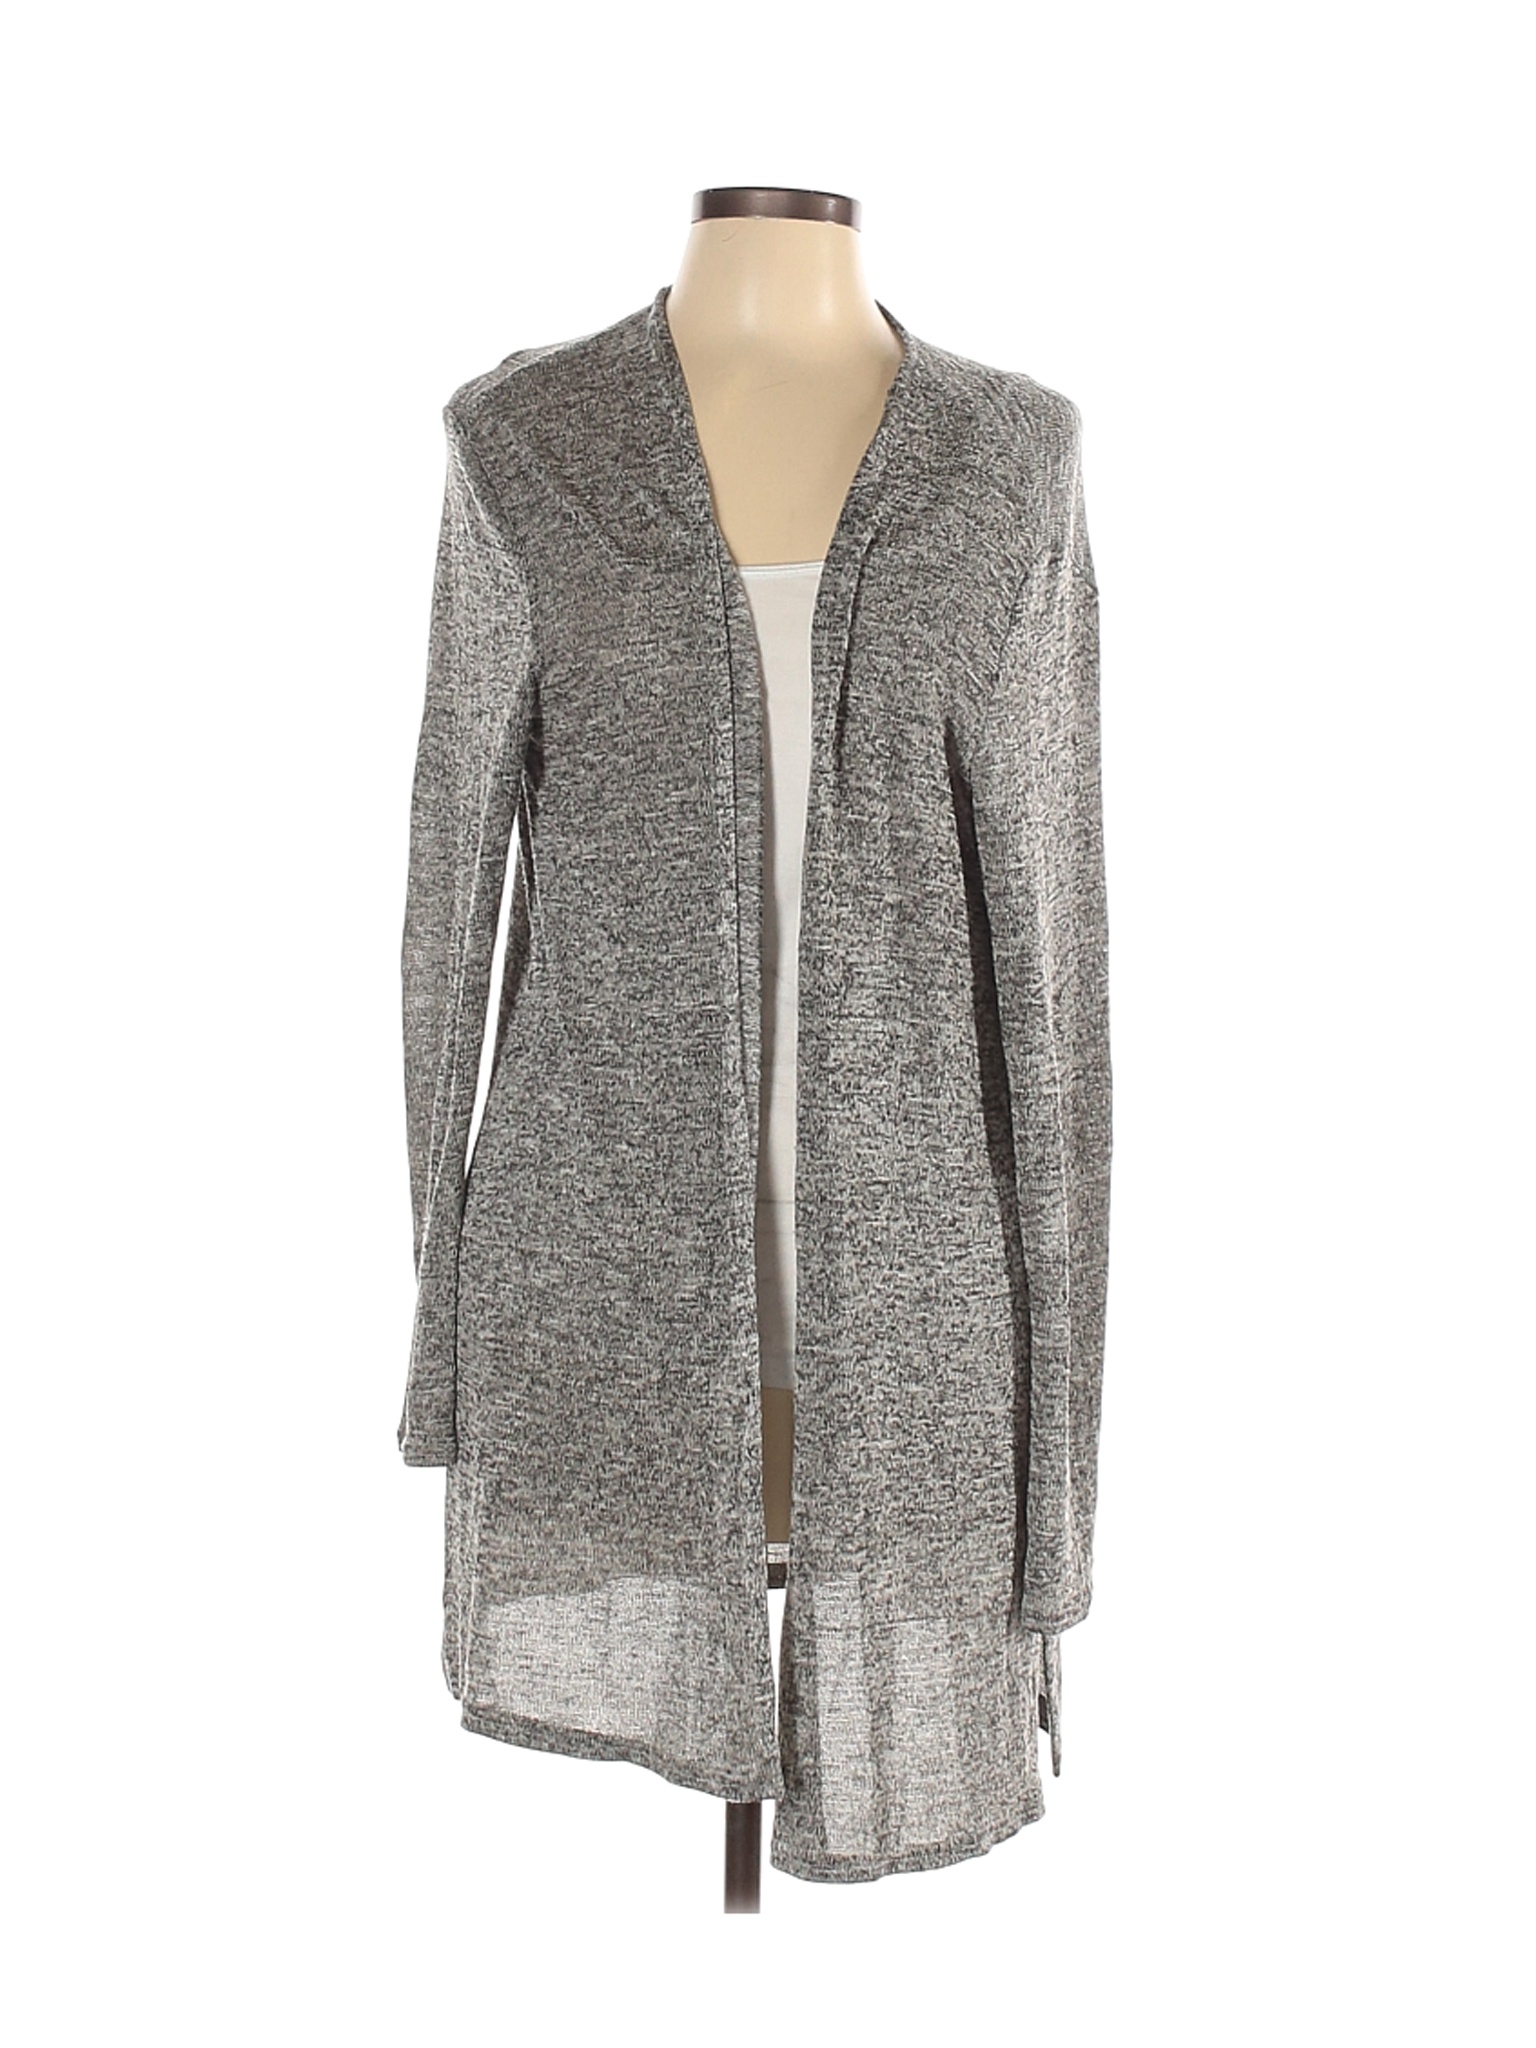 Divided by H&M Women Gray Cardigan L | eBay